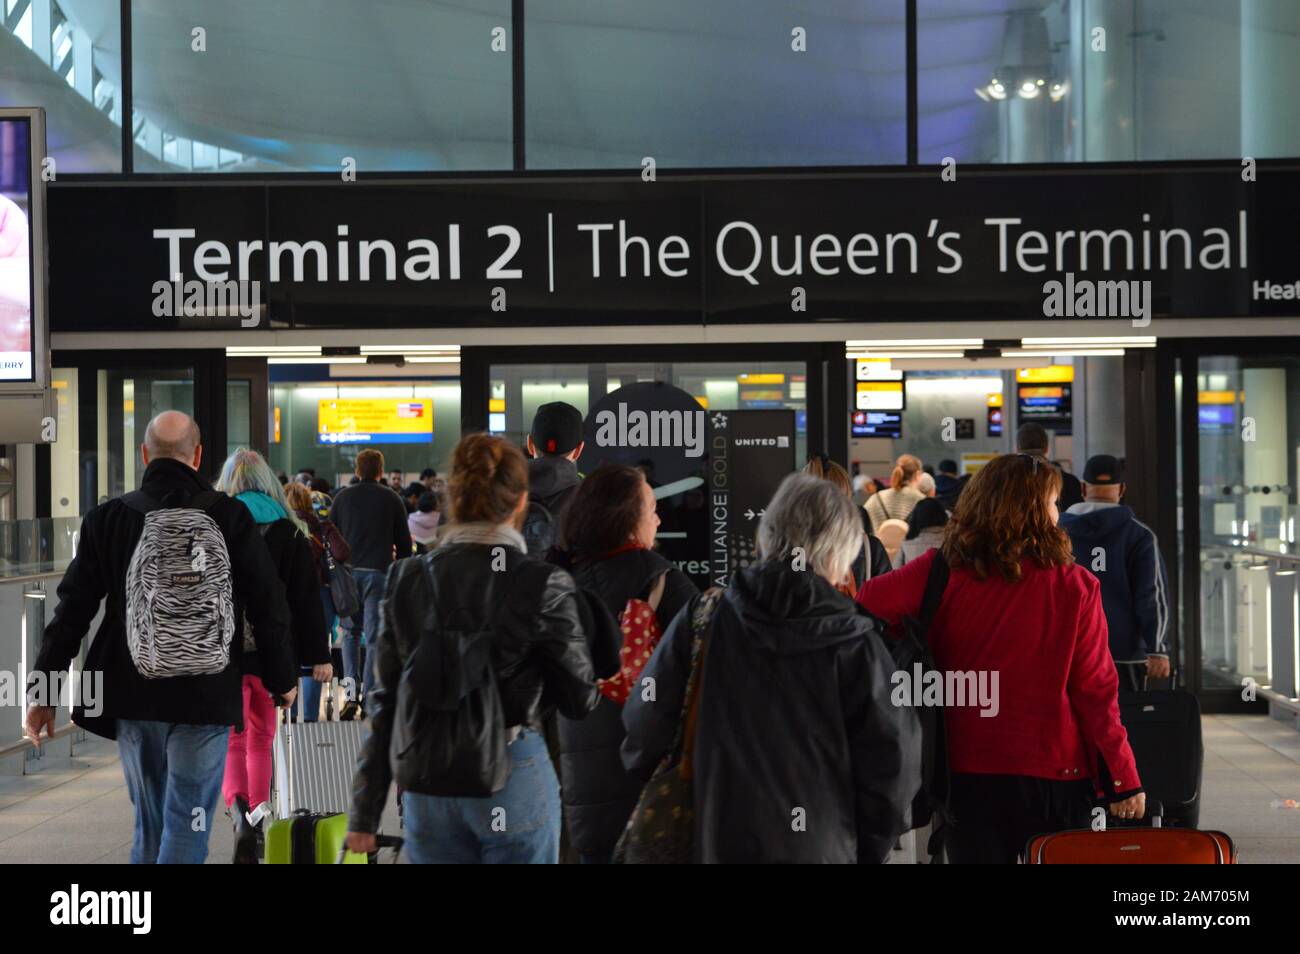 London, UK. 5 January, 2020. Terminal 2 (The Queen's Terminal) of London Heathrow airport in United Kingdom. Stock Photo